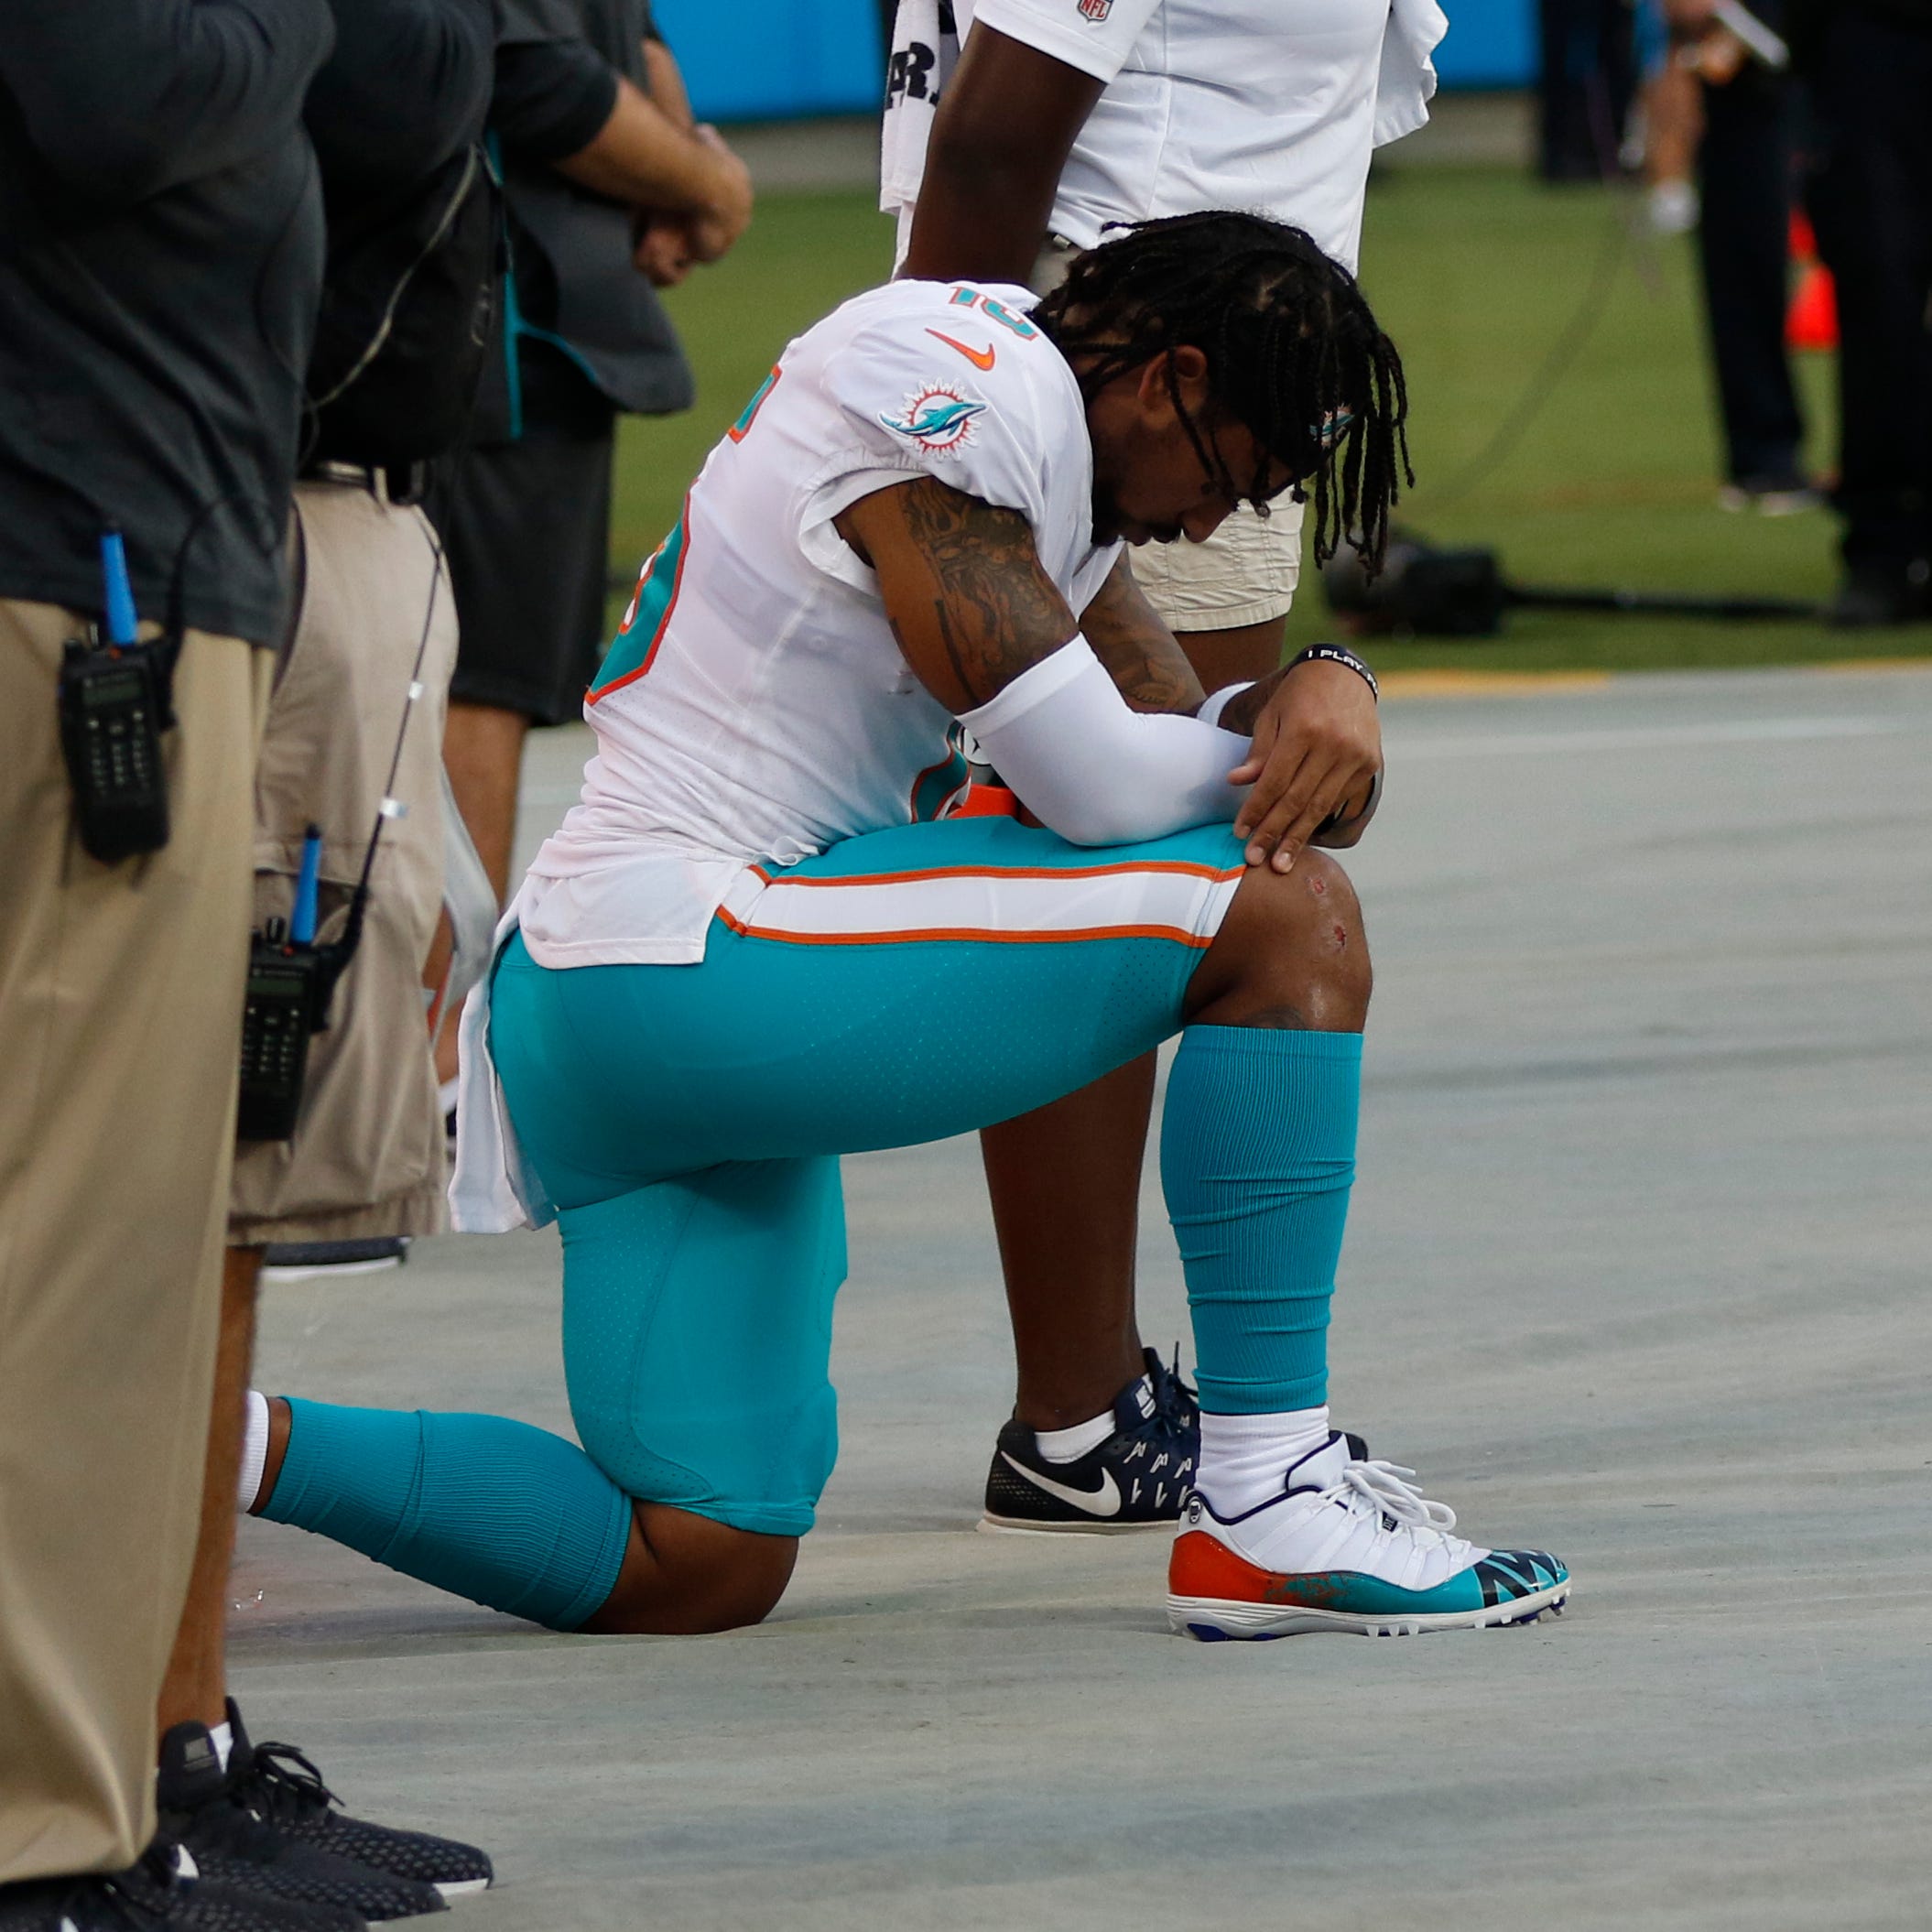 Miami Dolphins' Albert Wilson (15) kneels during the national anthem before a preseason NFL football game against the Carolina Panthers in Charlotte, N.C., Friday, Aug. 17, 2018.